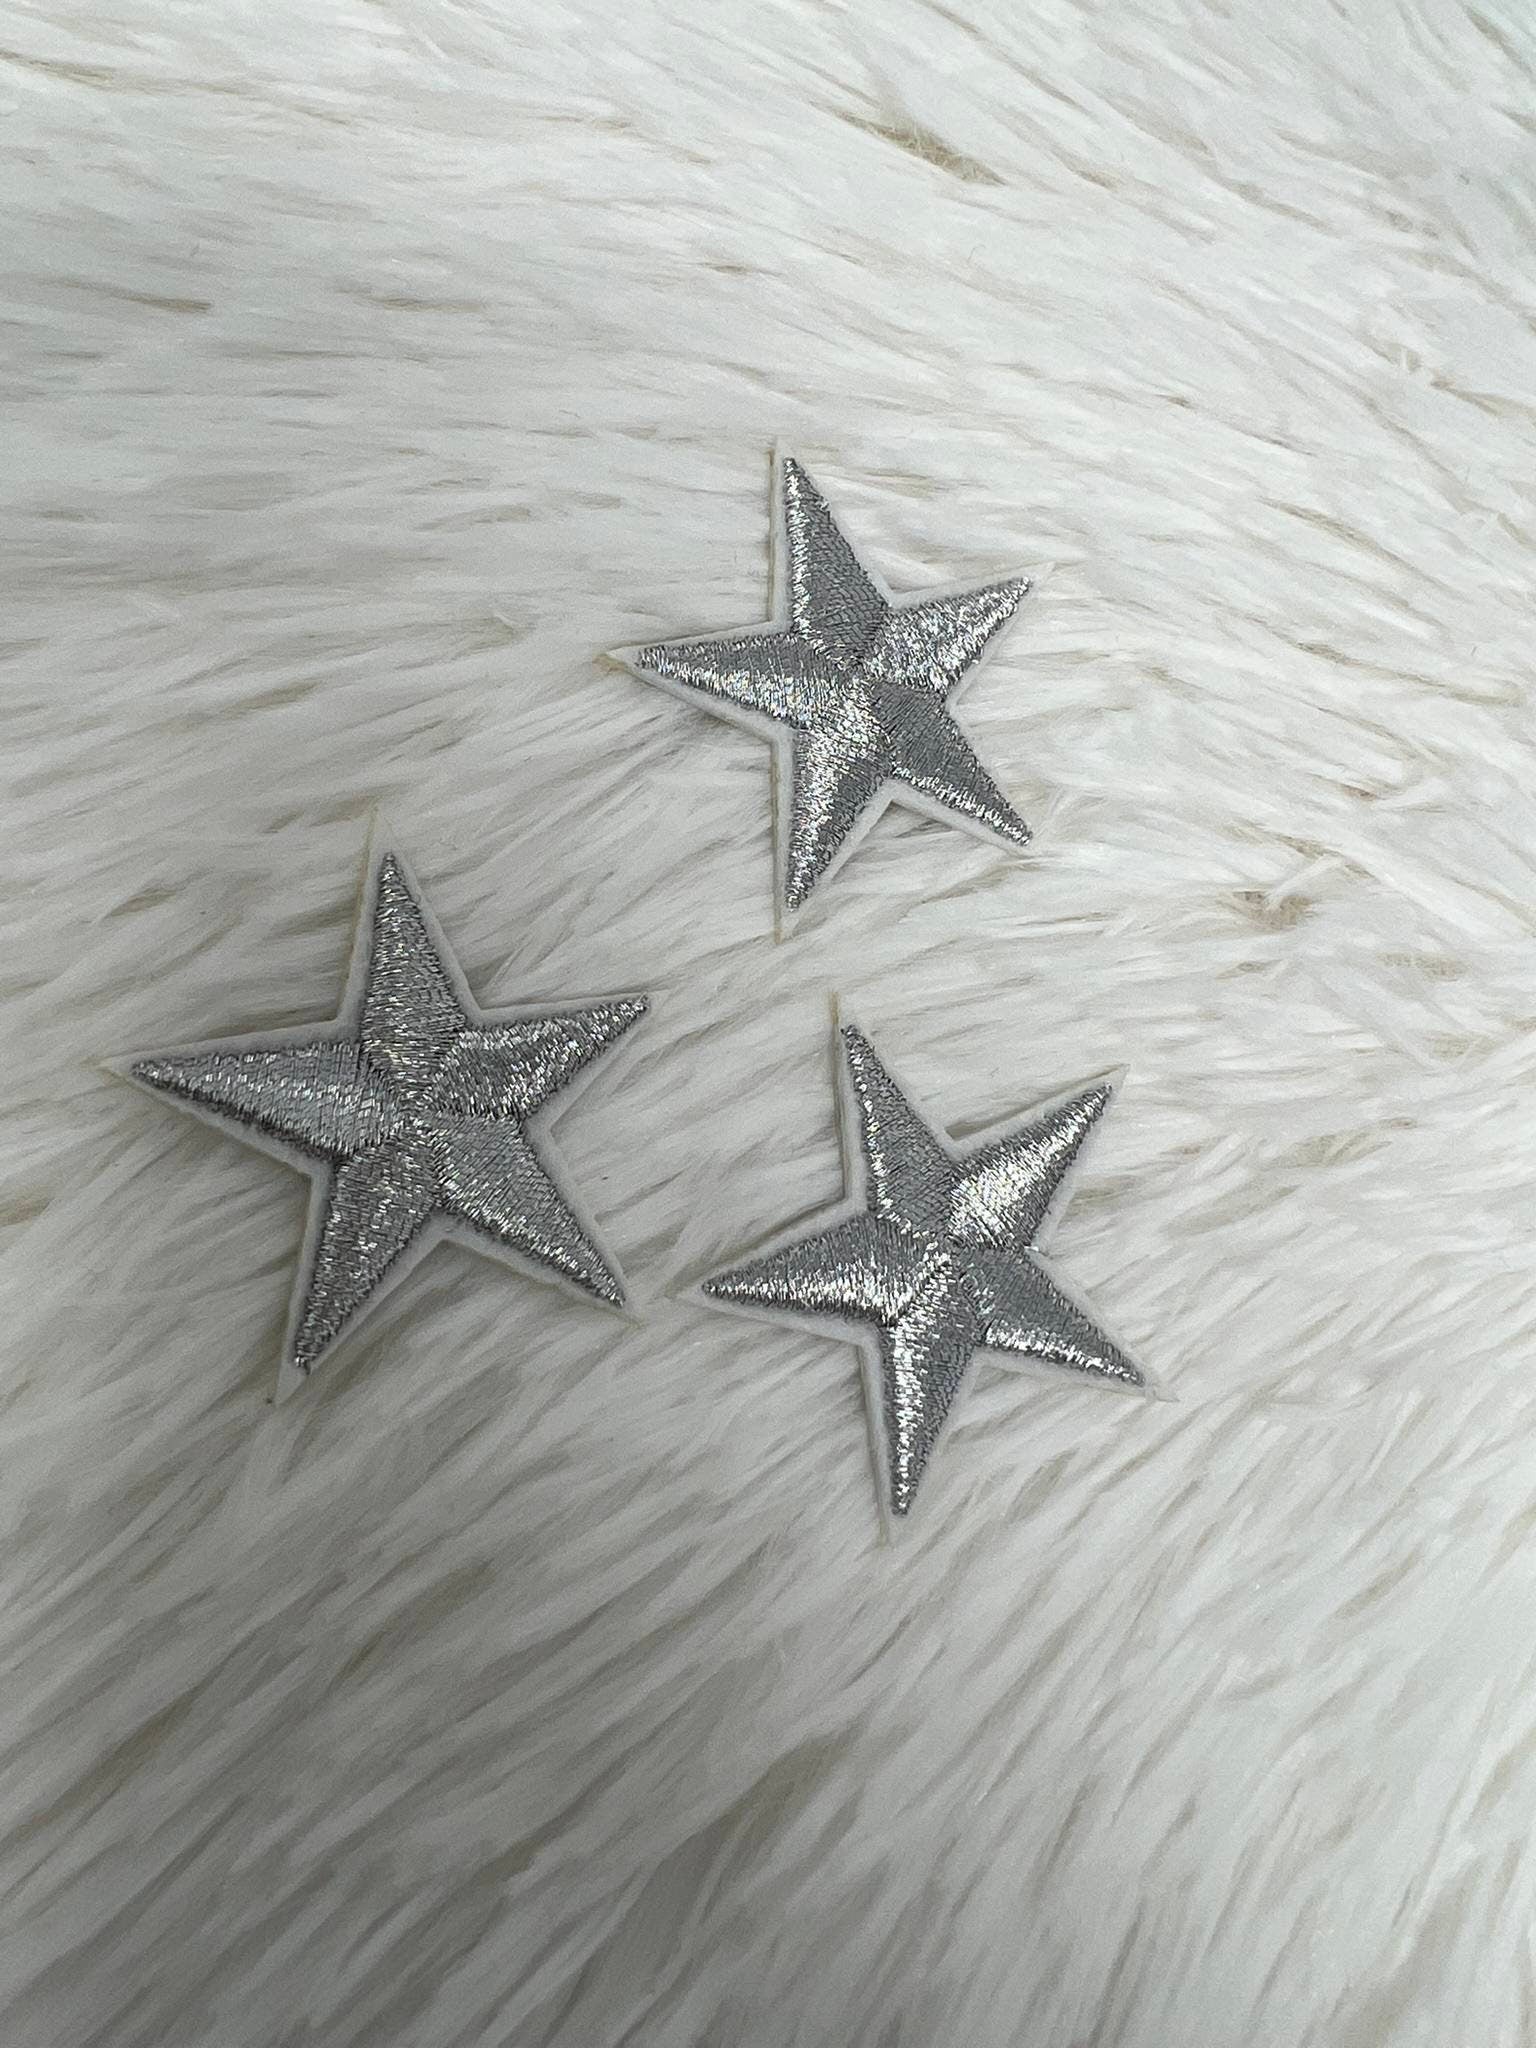 2pc/Mini SILVER Star Applique Set, Star Patch, 1" inch Small Stars, Cool Applique, Iron-on Embroidered Patch, Patches for Clothes and Shoes